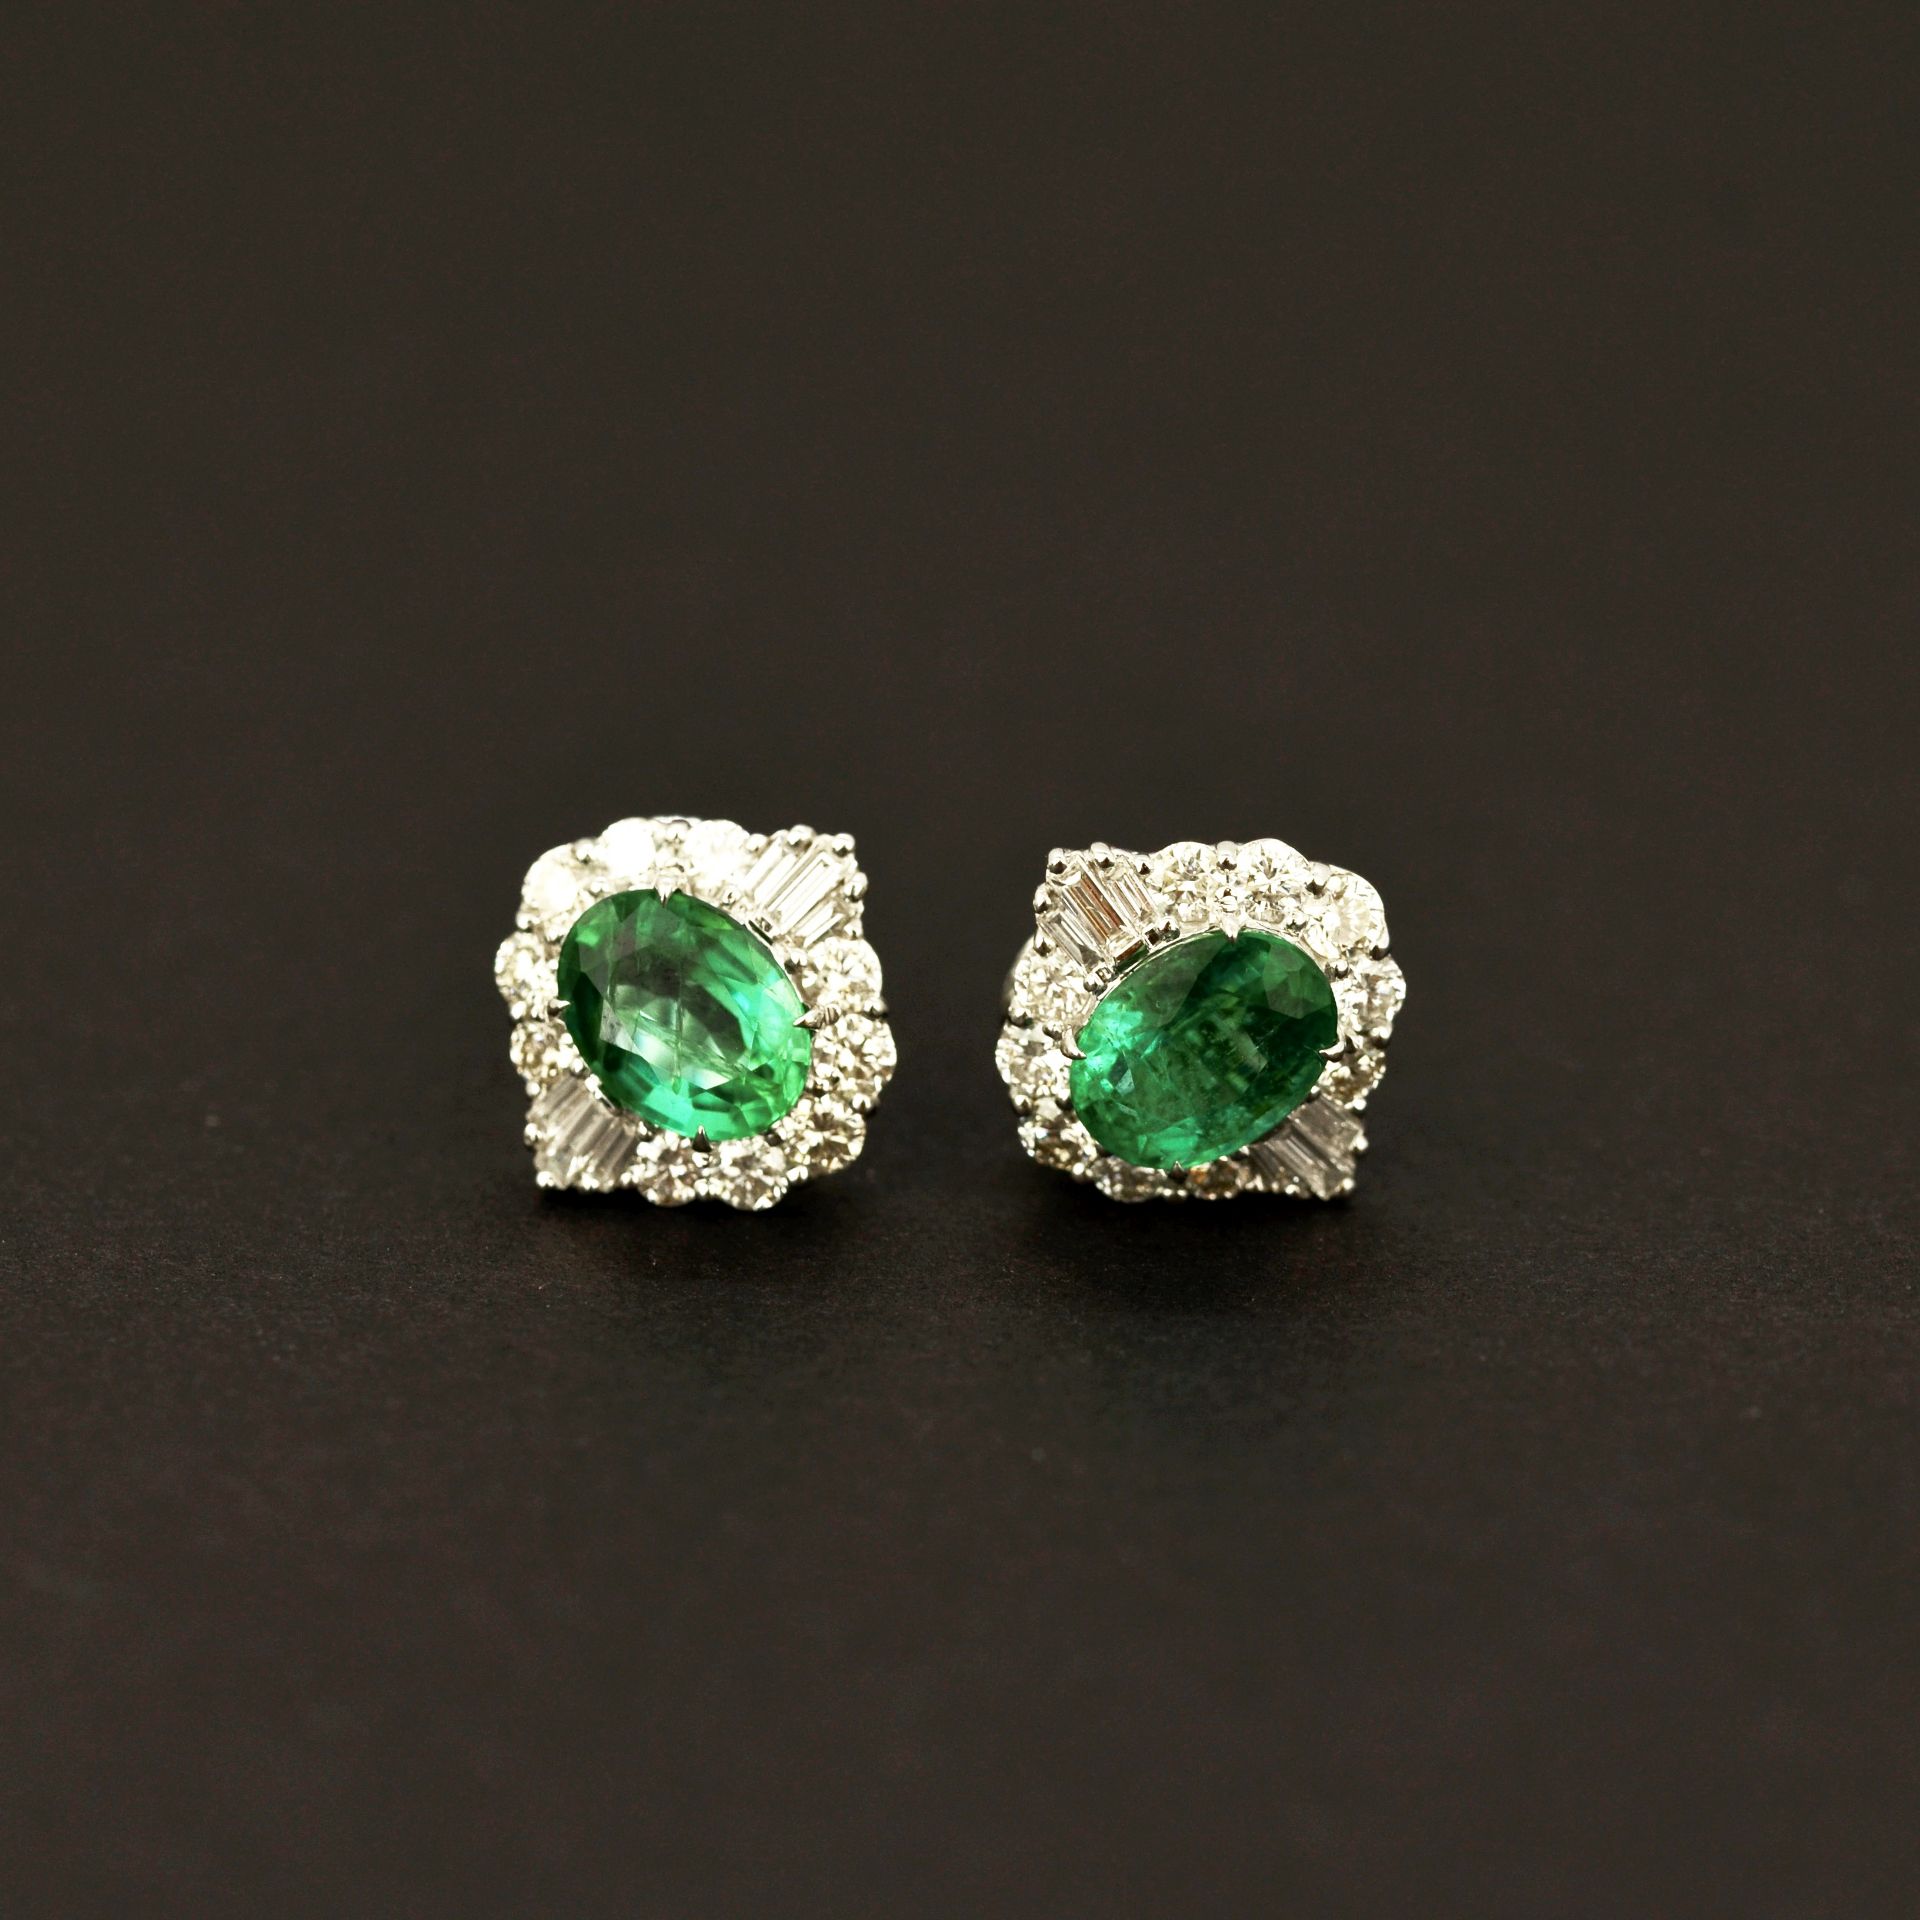 A pair of 18ct white gold stud earrings set with oval cut emeralds, approx. 2.64ct total, surrounded